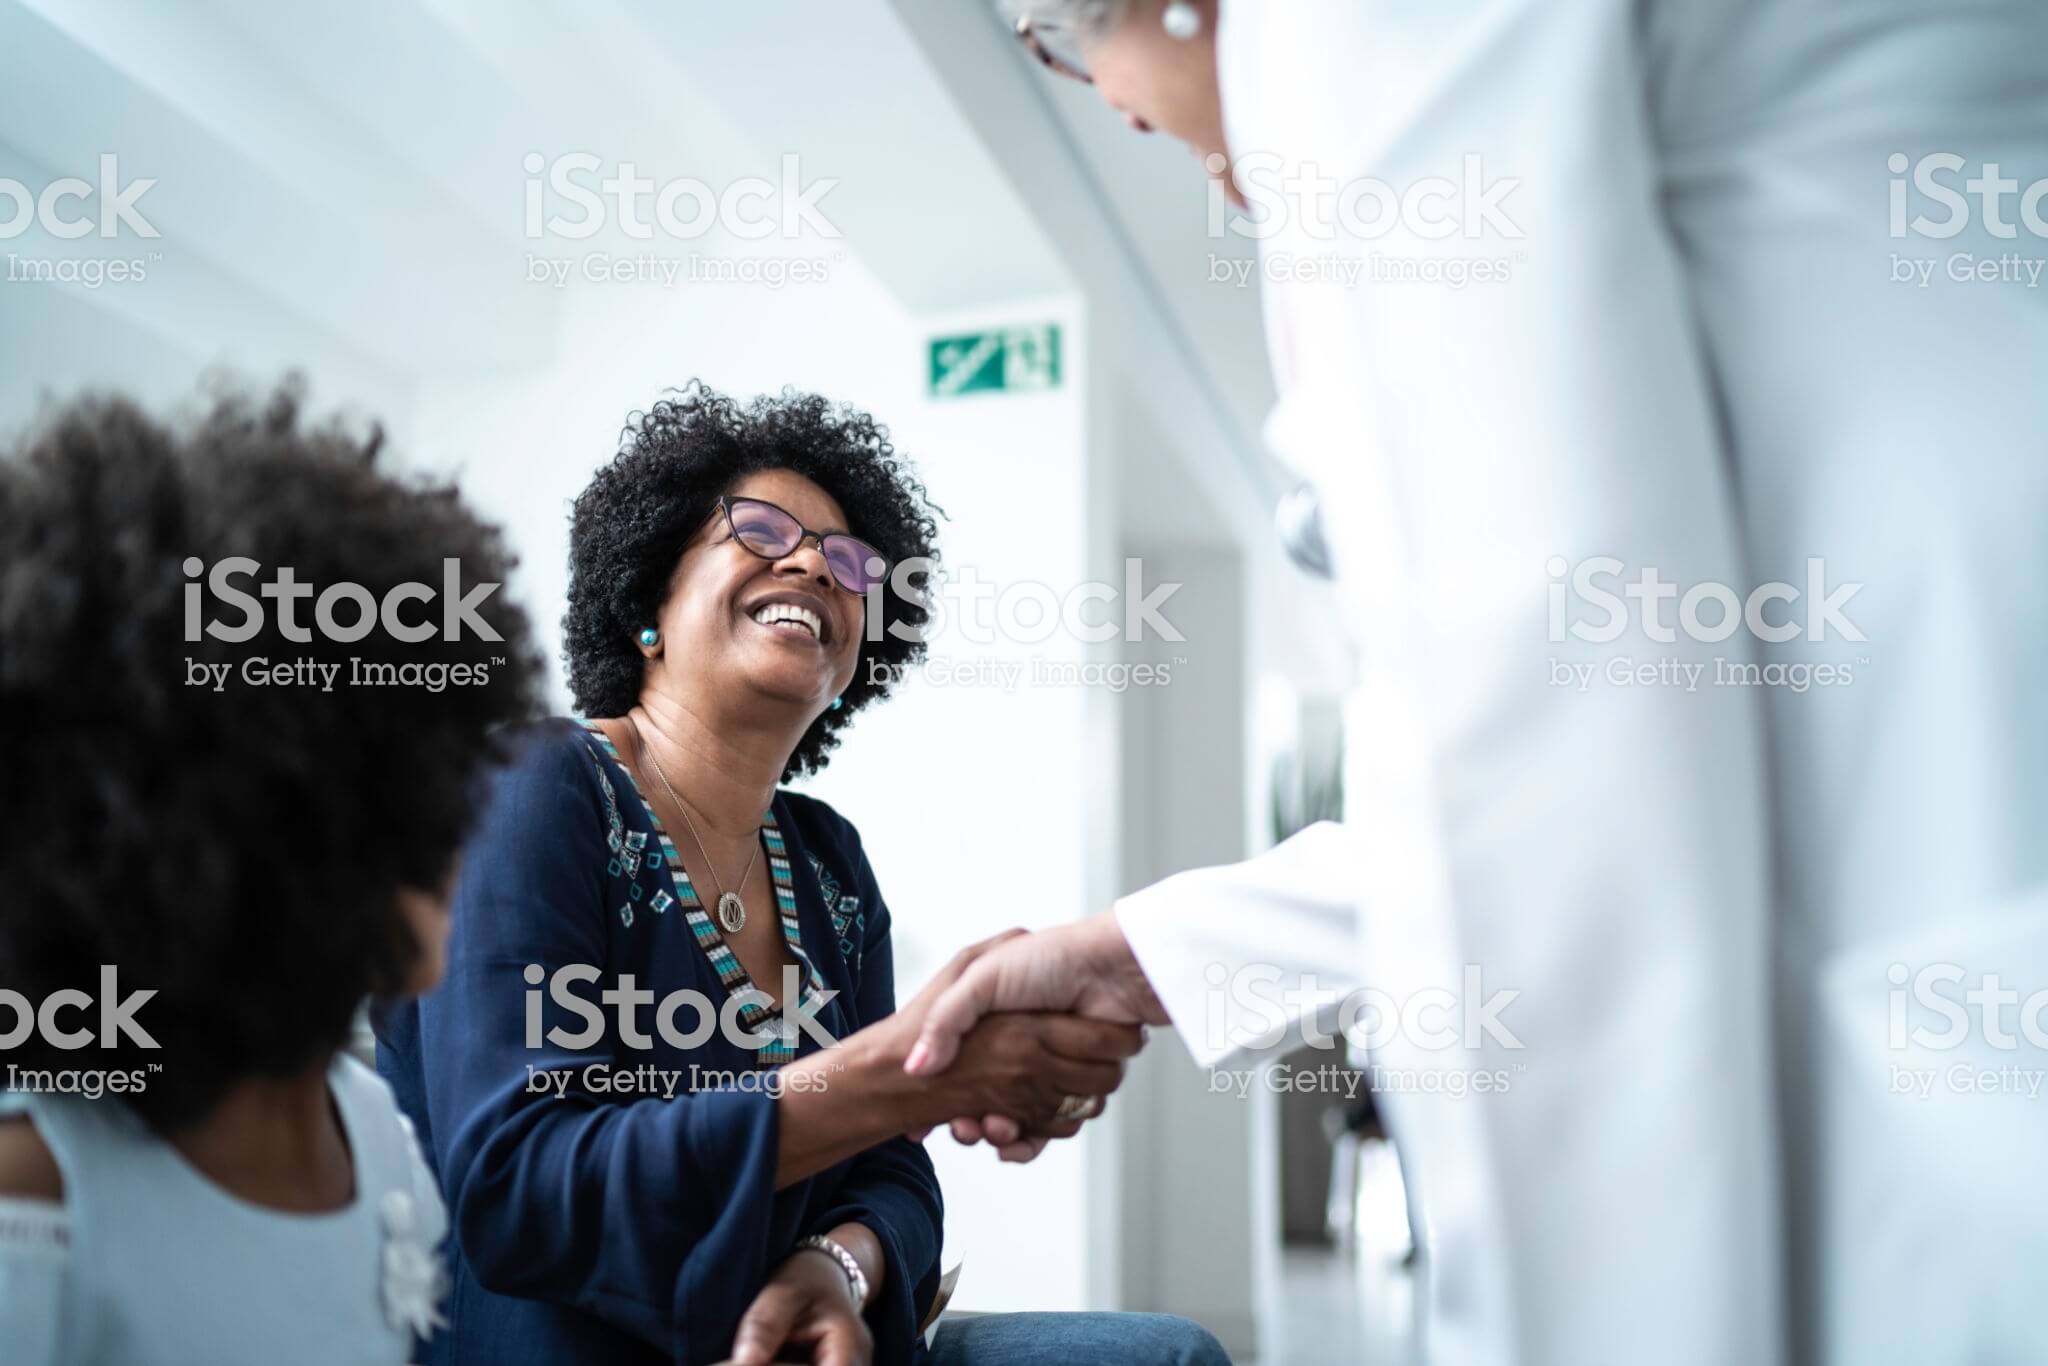 Woman shaking hands with a female doctor.